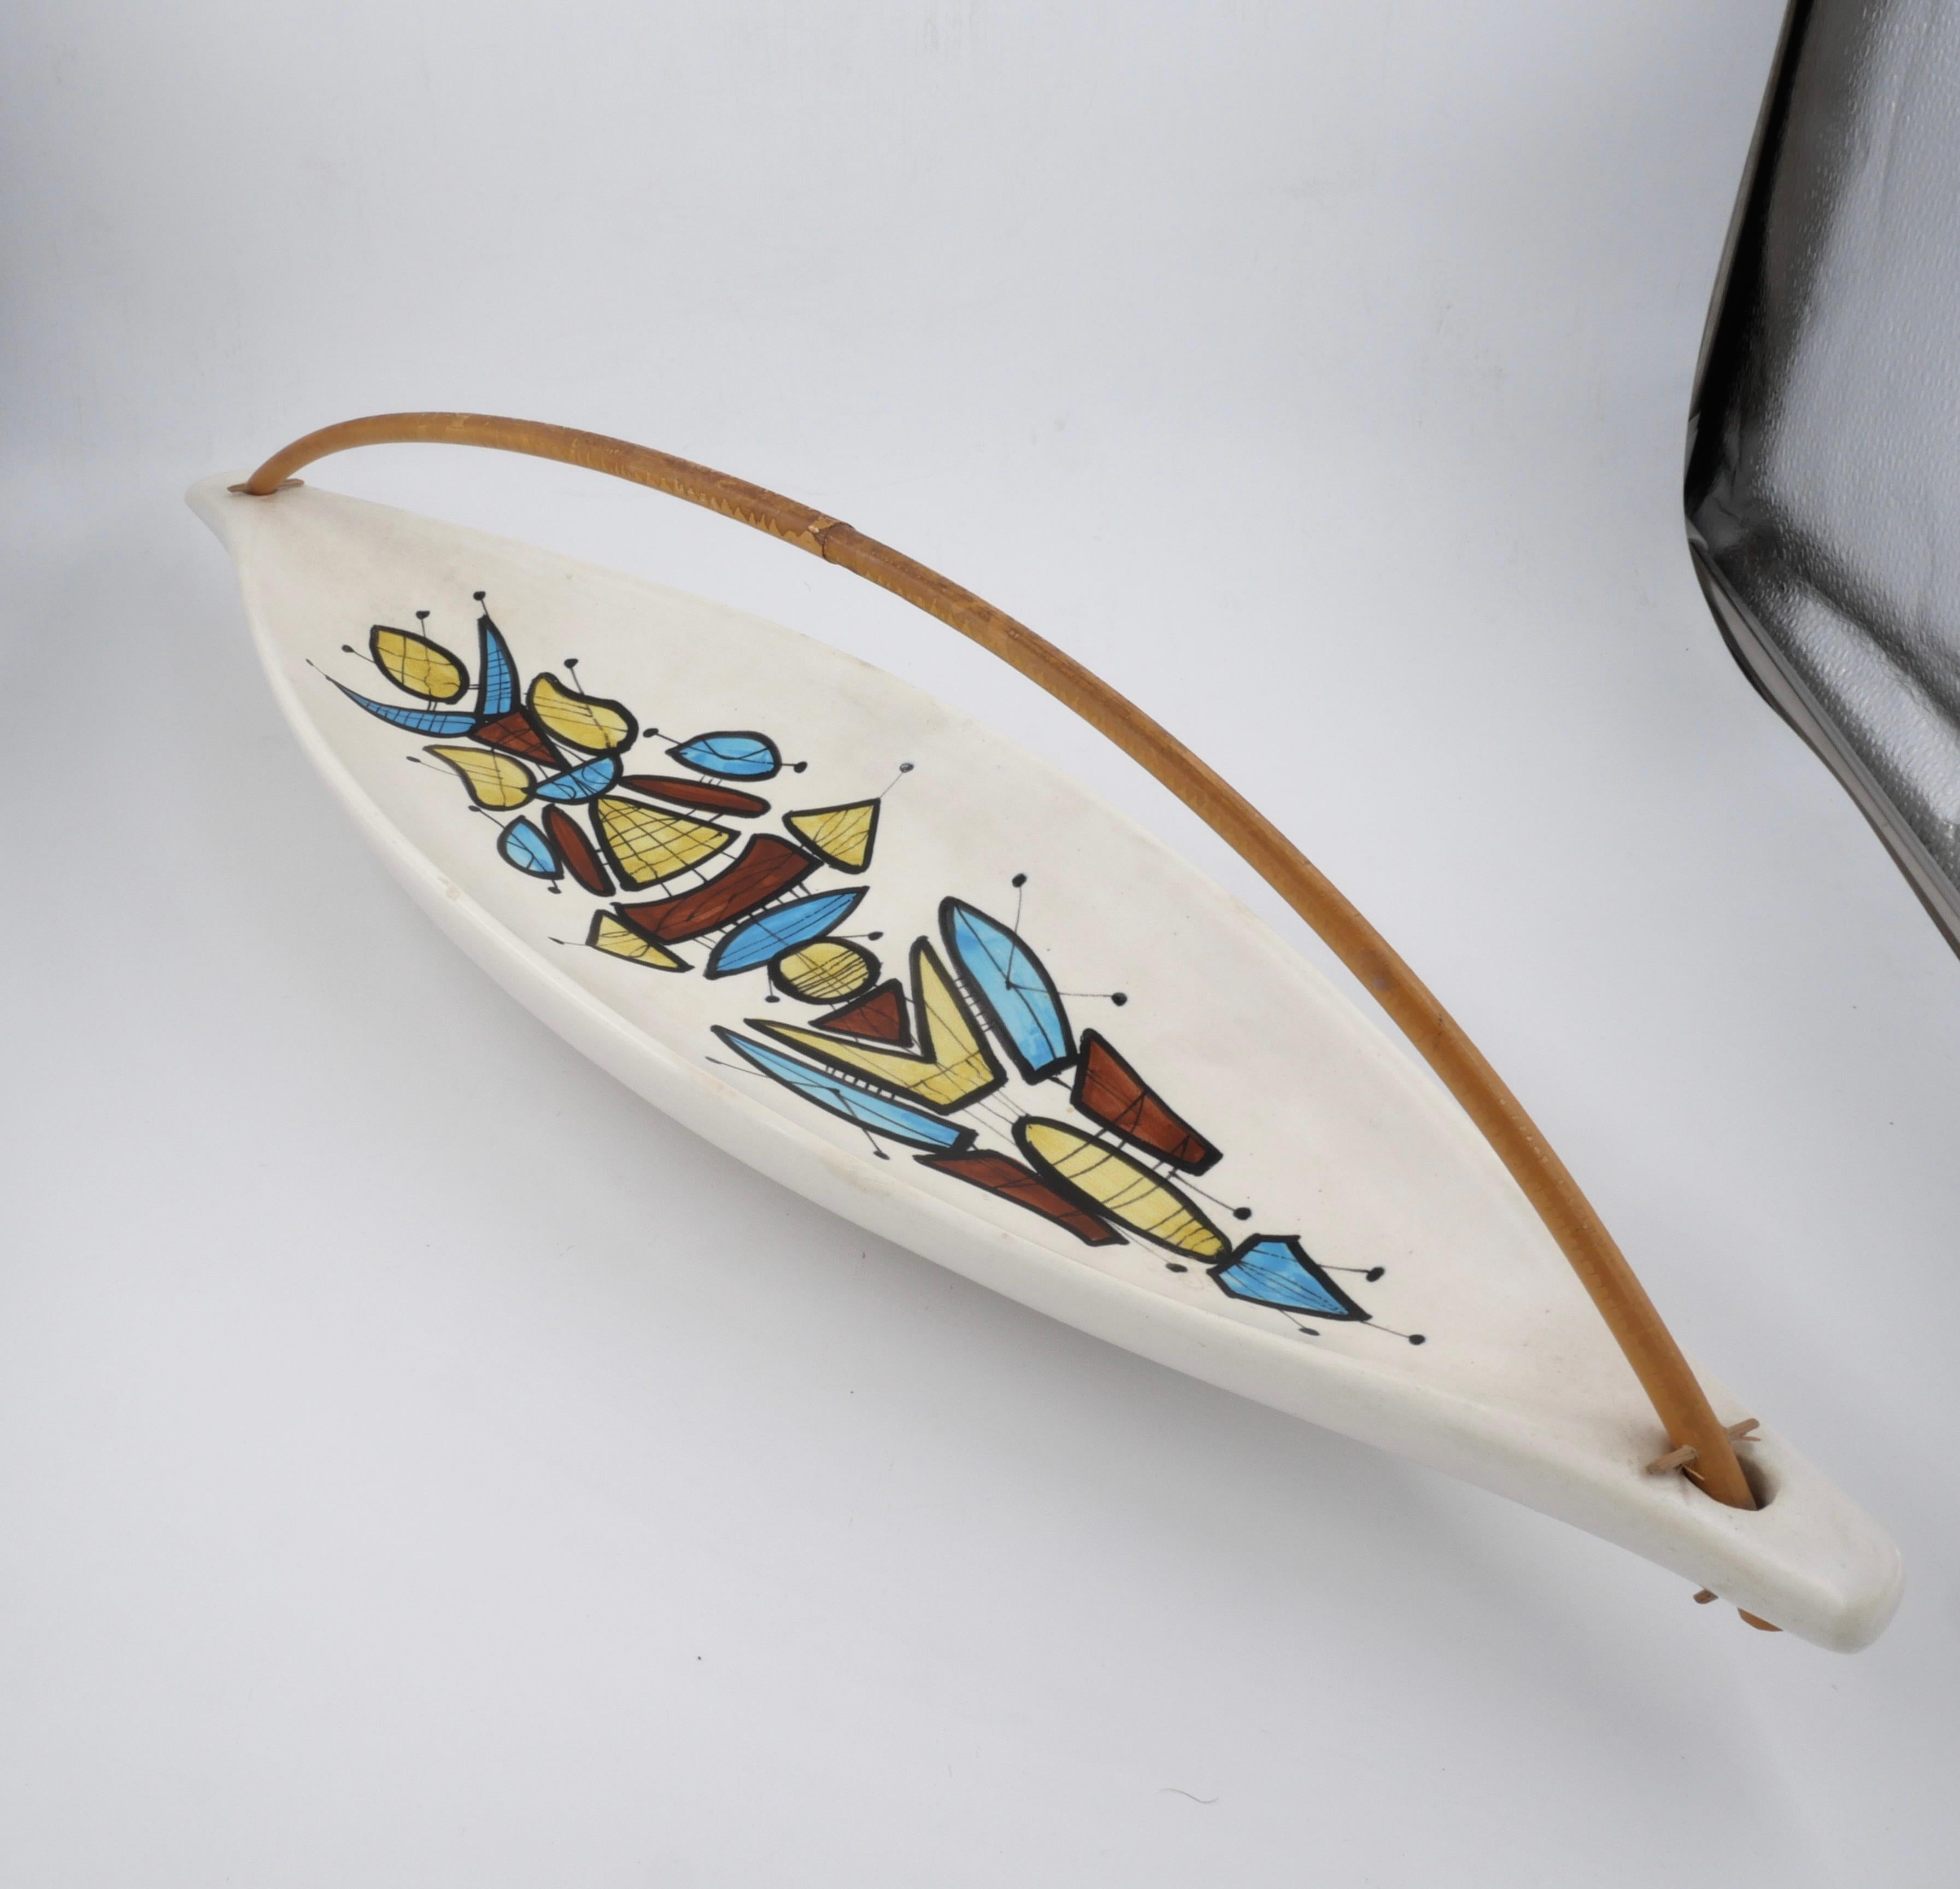 Roger Capron (1922-2006) decorative dish with bamboo handle

Signed Capron, Vallauris, 1950s.

Roger Capron was born in Vincennes, France on September 4, 1922. Interested in drawing, he studied Applied Arts in Paris from 1939 to 1943 and worked